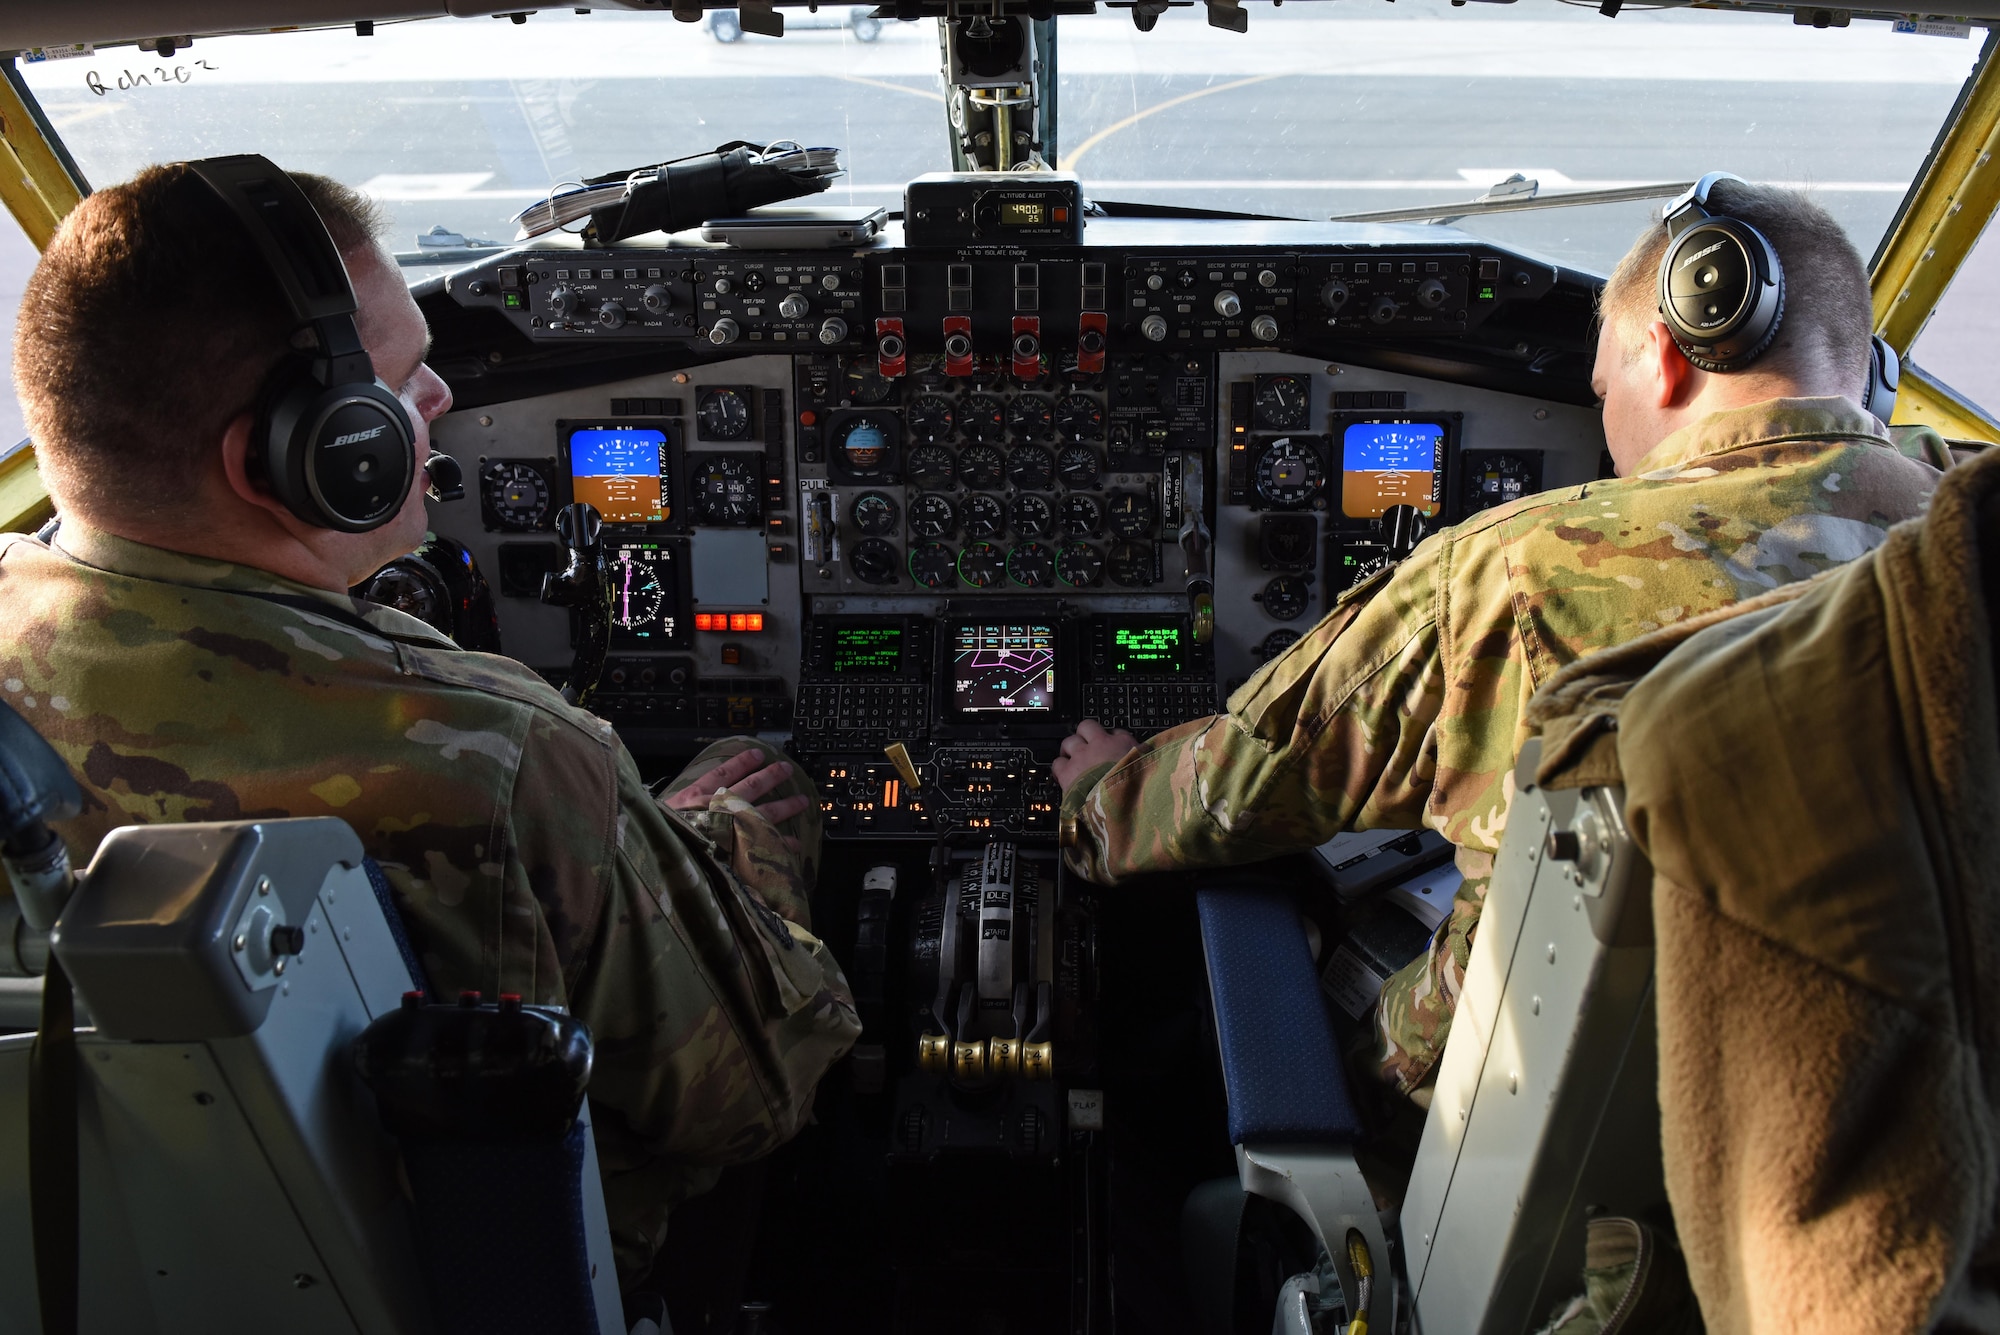 U.S. Air Force Capt. Justin Medlen, Operation Juniper Micron 384th Air Refueling Squadron aircraft commander (left) and 1st Lt. Colton Currier, 384th ARS co-pilot, prepare for take-off from Fairchild Air Force Base, Washington, in preparation to support Operation Juniper Micron Sept. 2019.